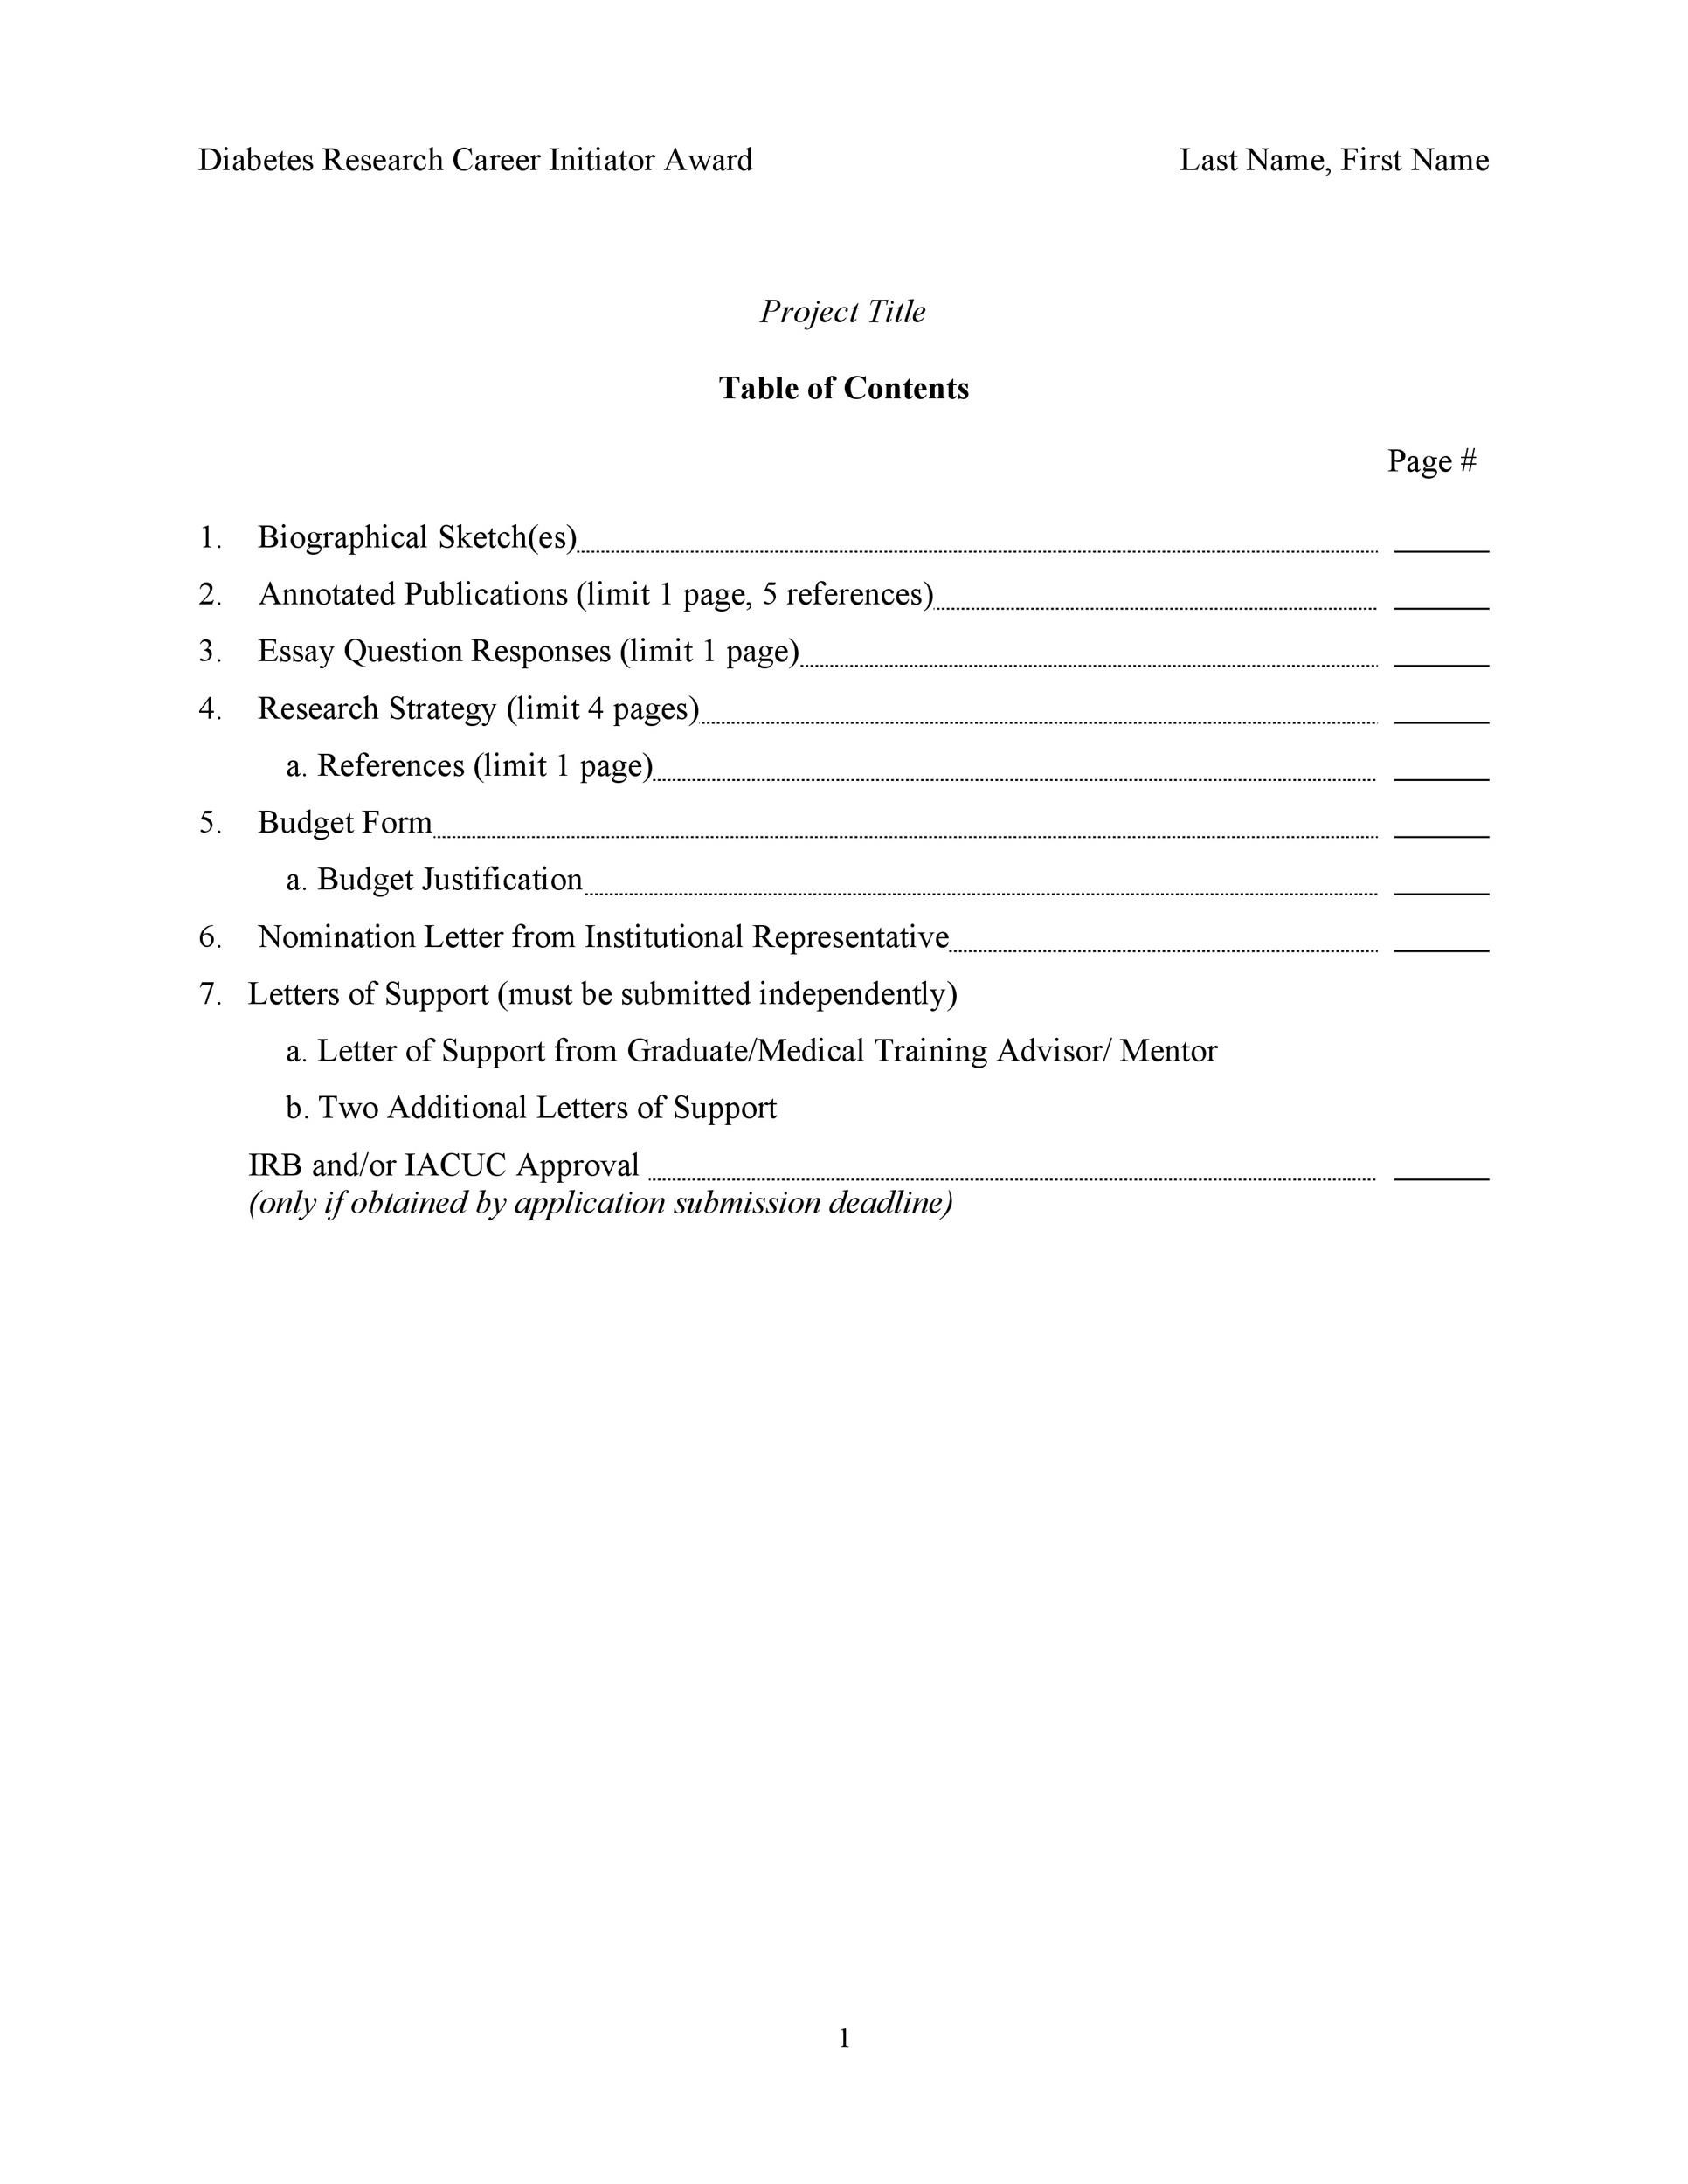 example of table of contents for business report